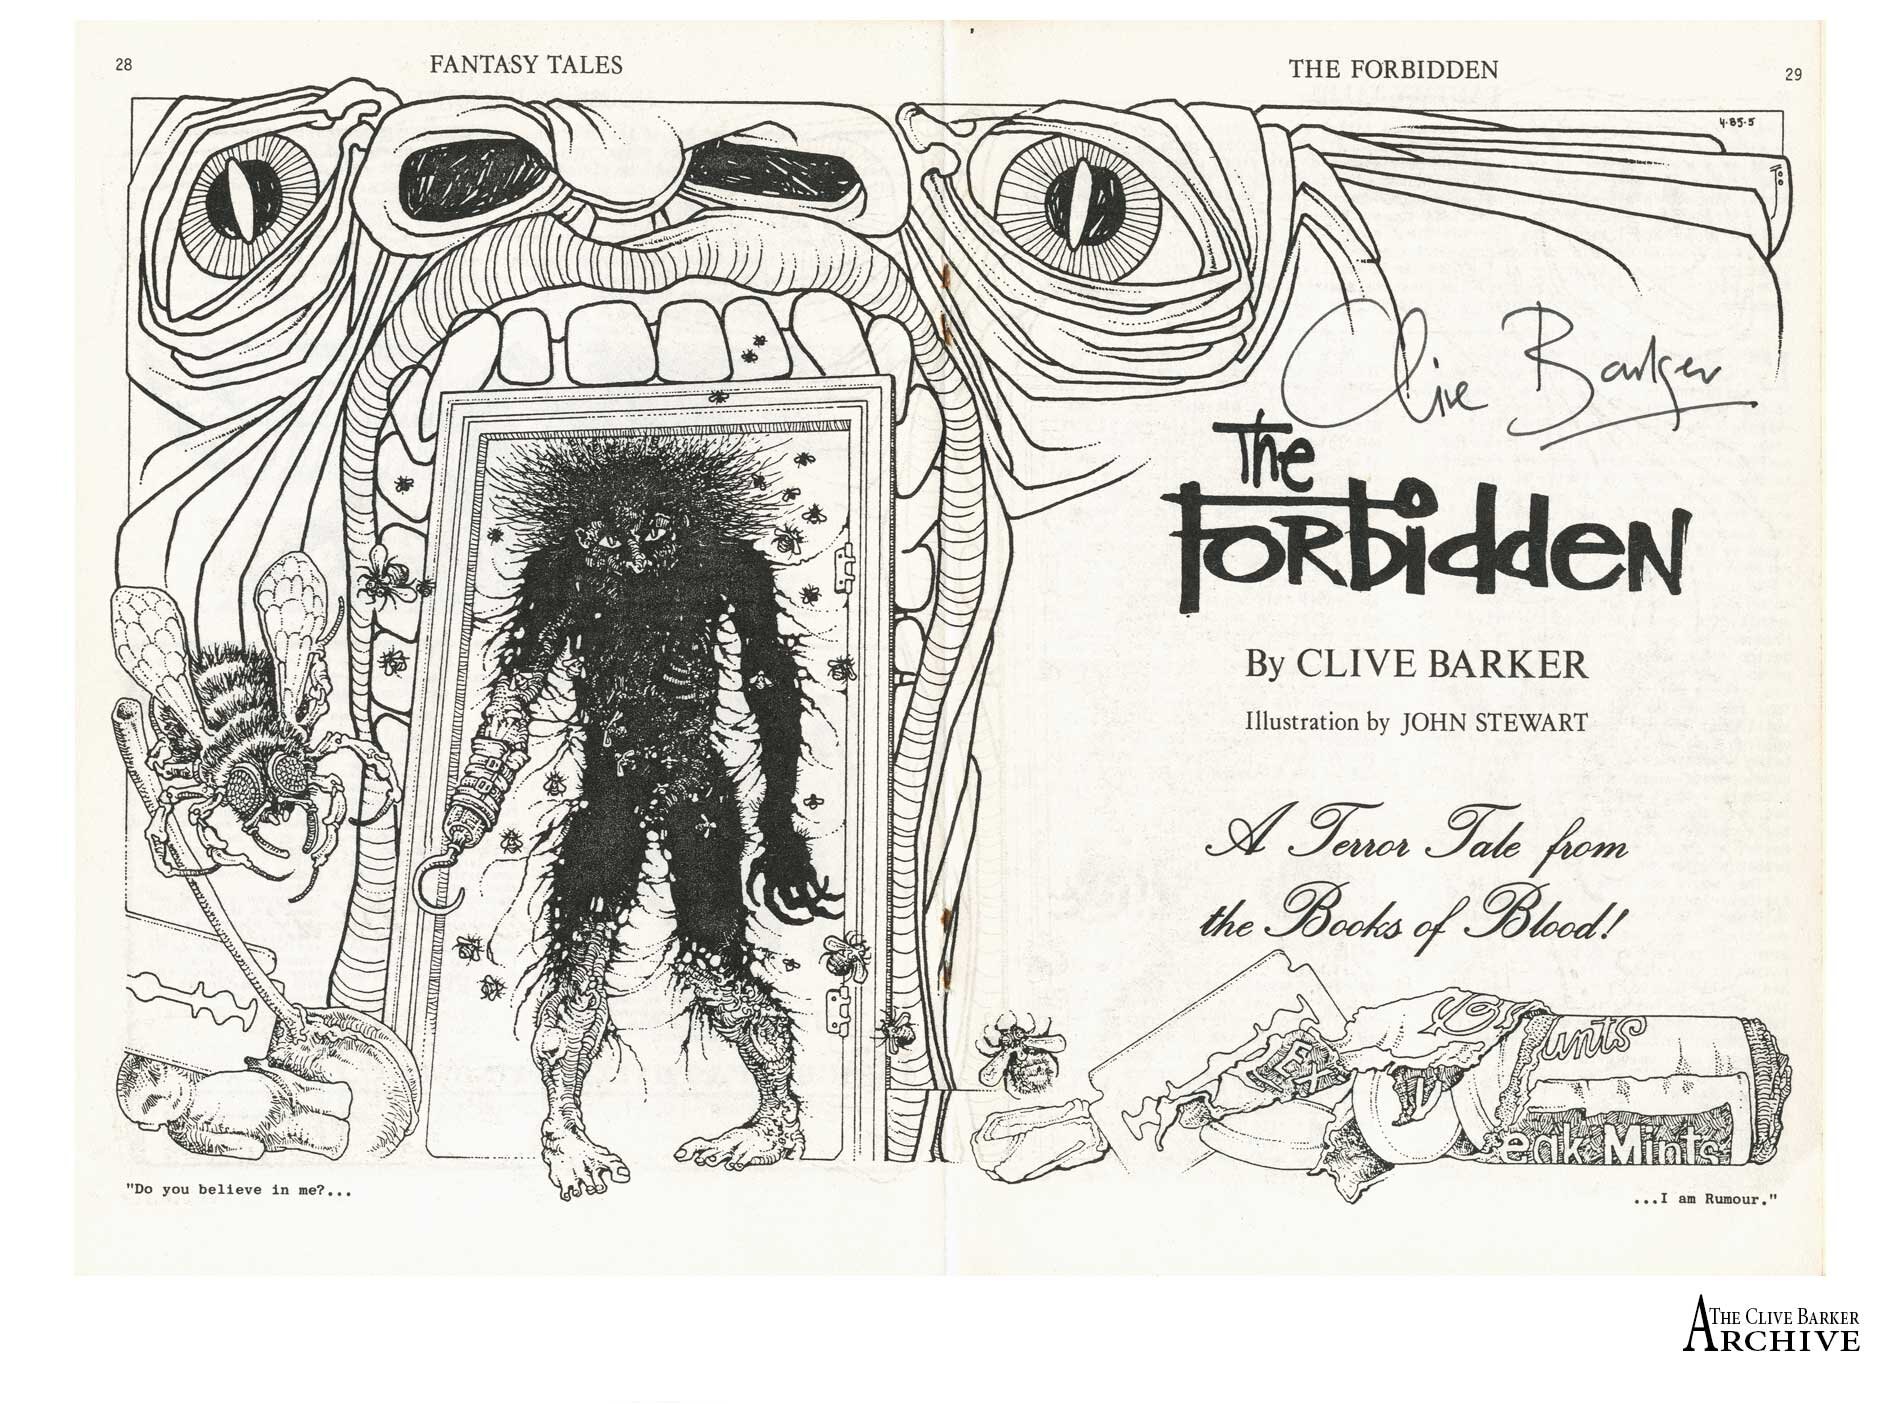 The Forbidden — Blog — The Clive Barker Archive